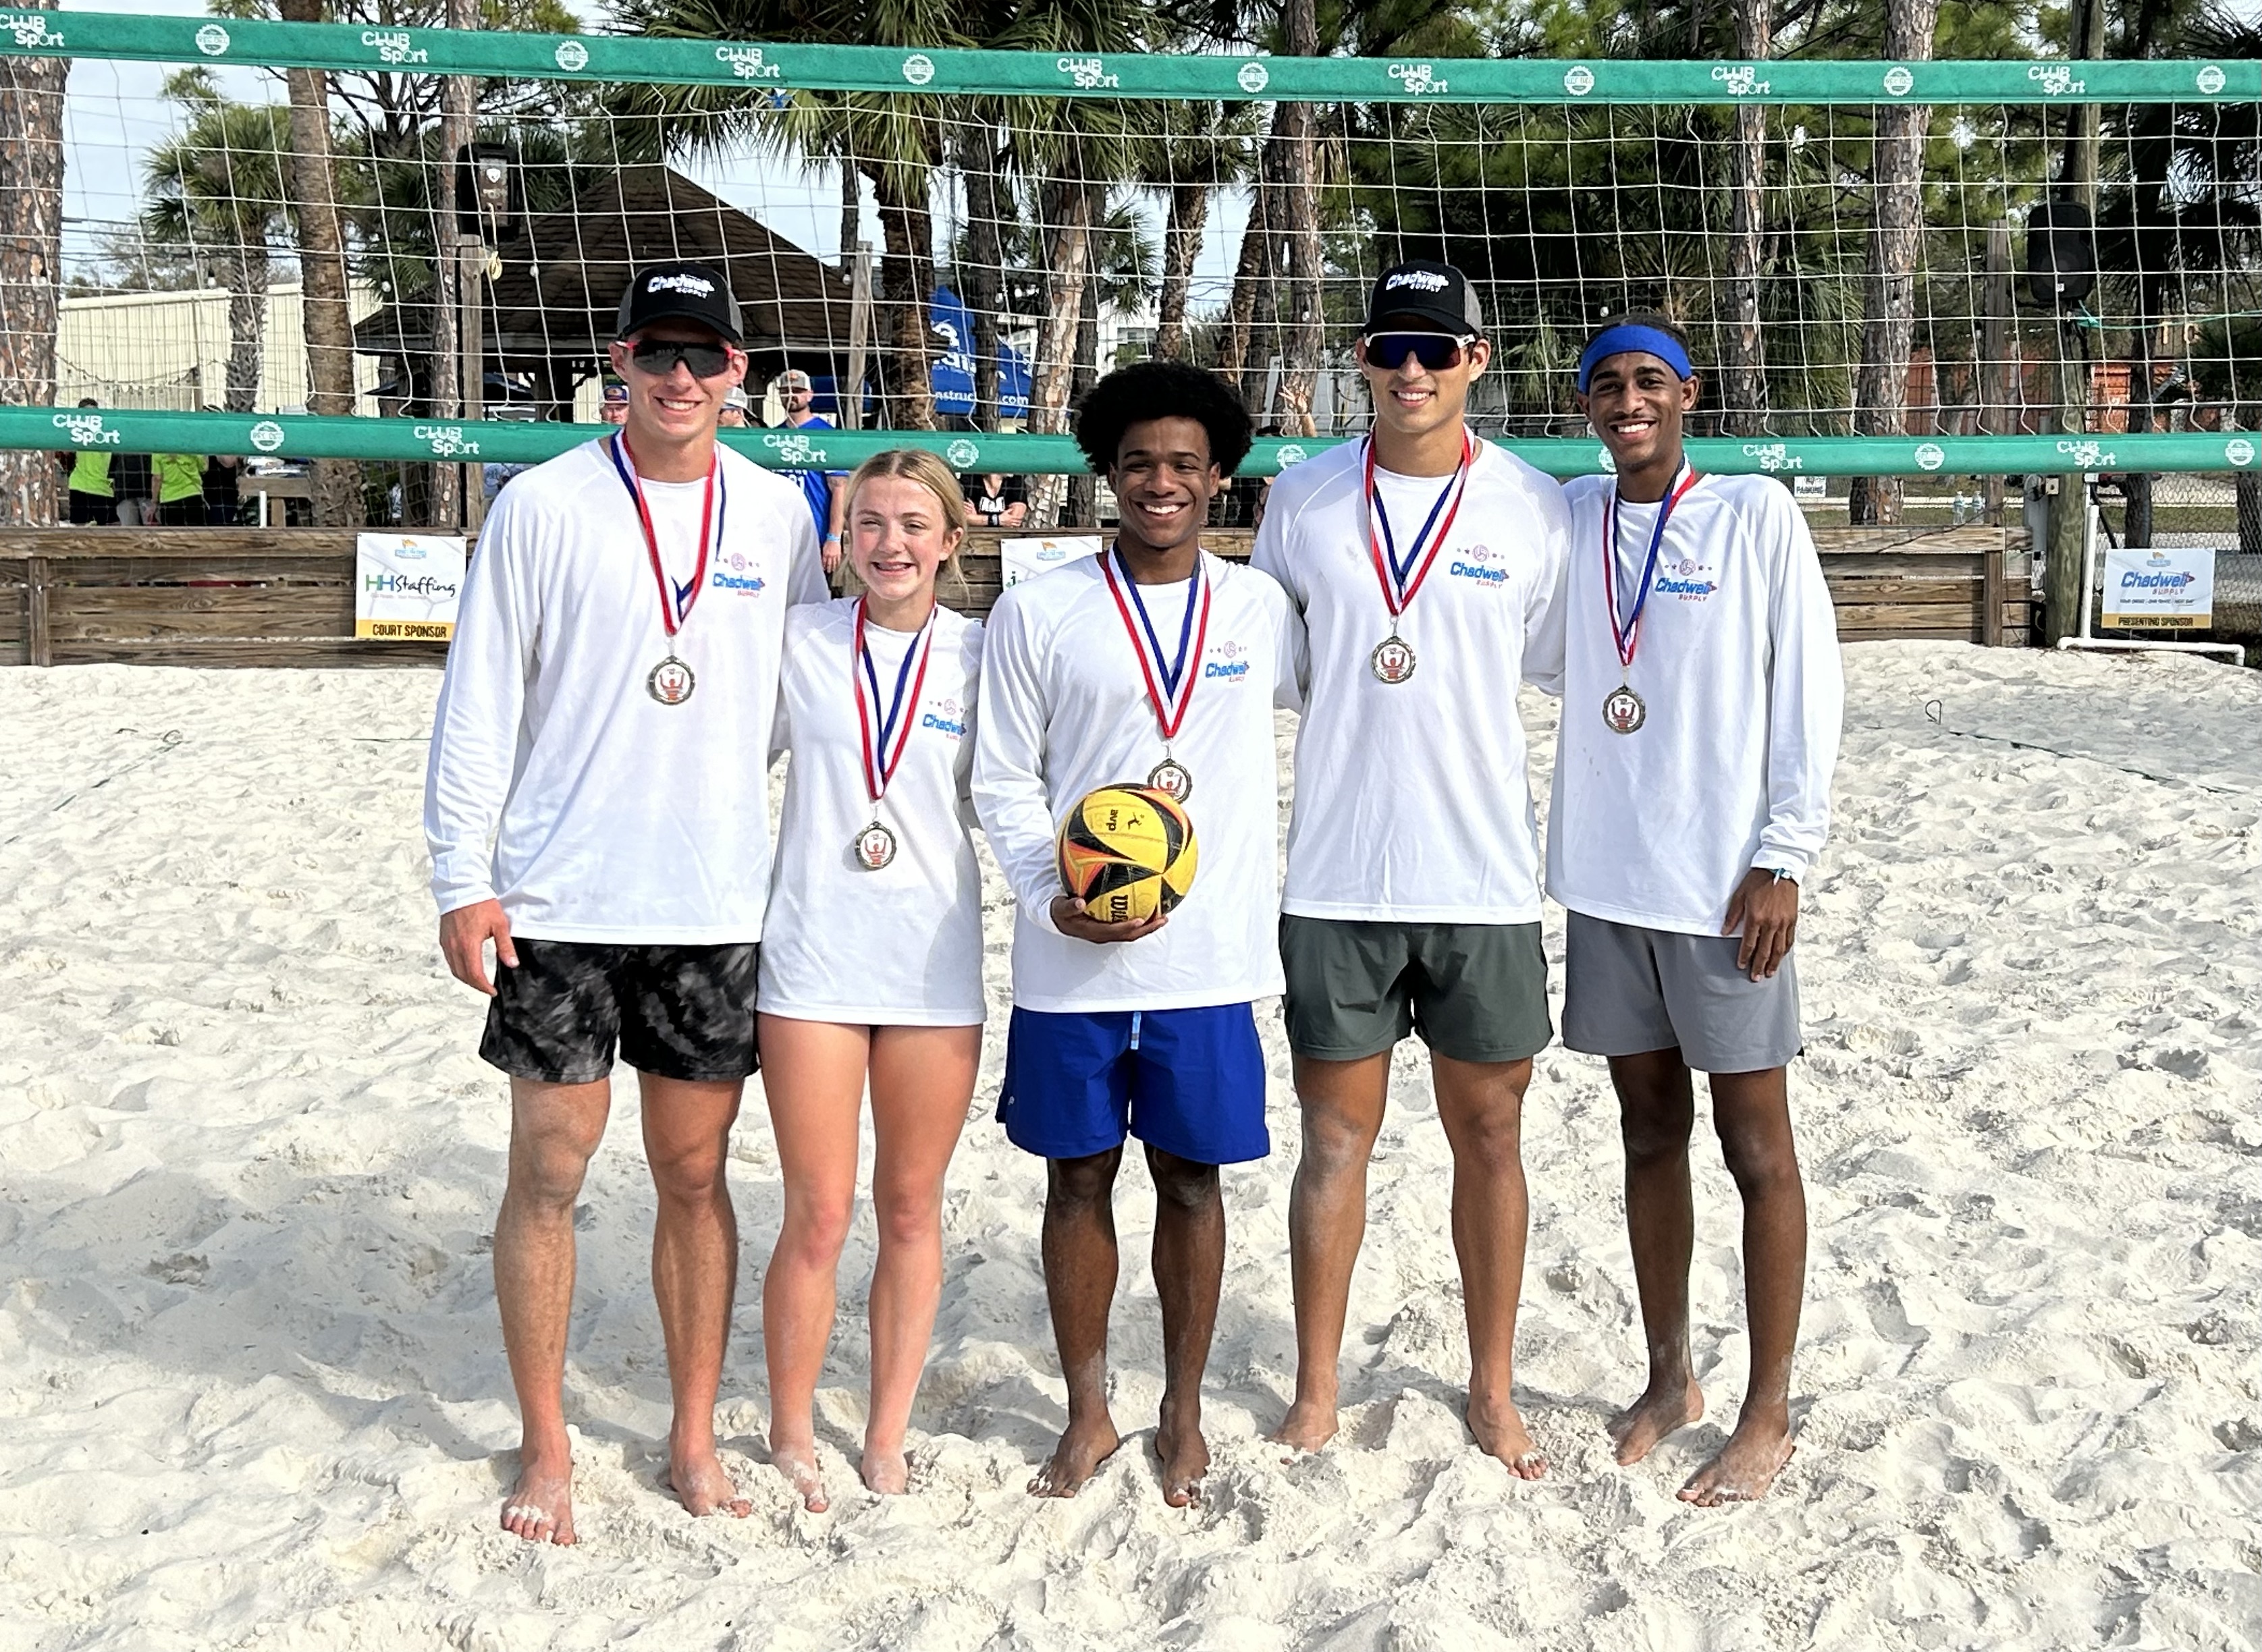 Chadwell Supply players Caleb Kwekel, Anastasia Harding, Elias De Jesus, Dylan Zacca, and Zardo De Jesus competed hard all day and came out on top. 